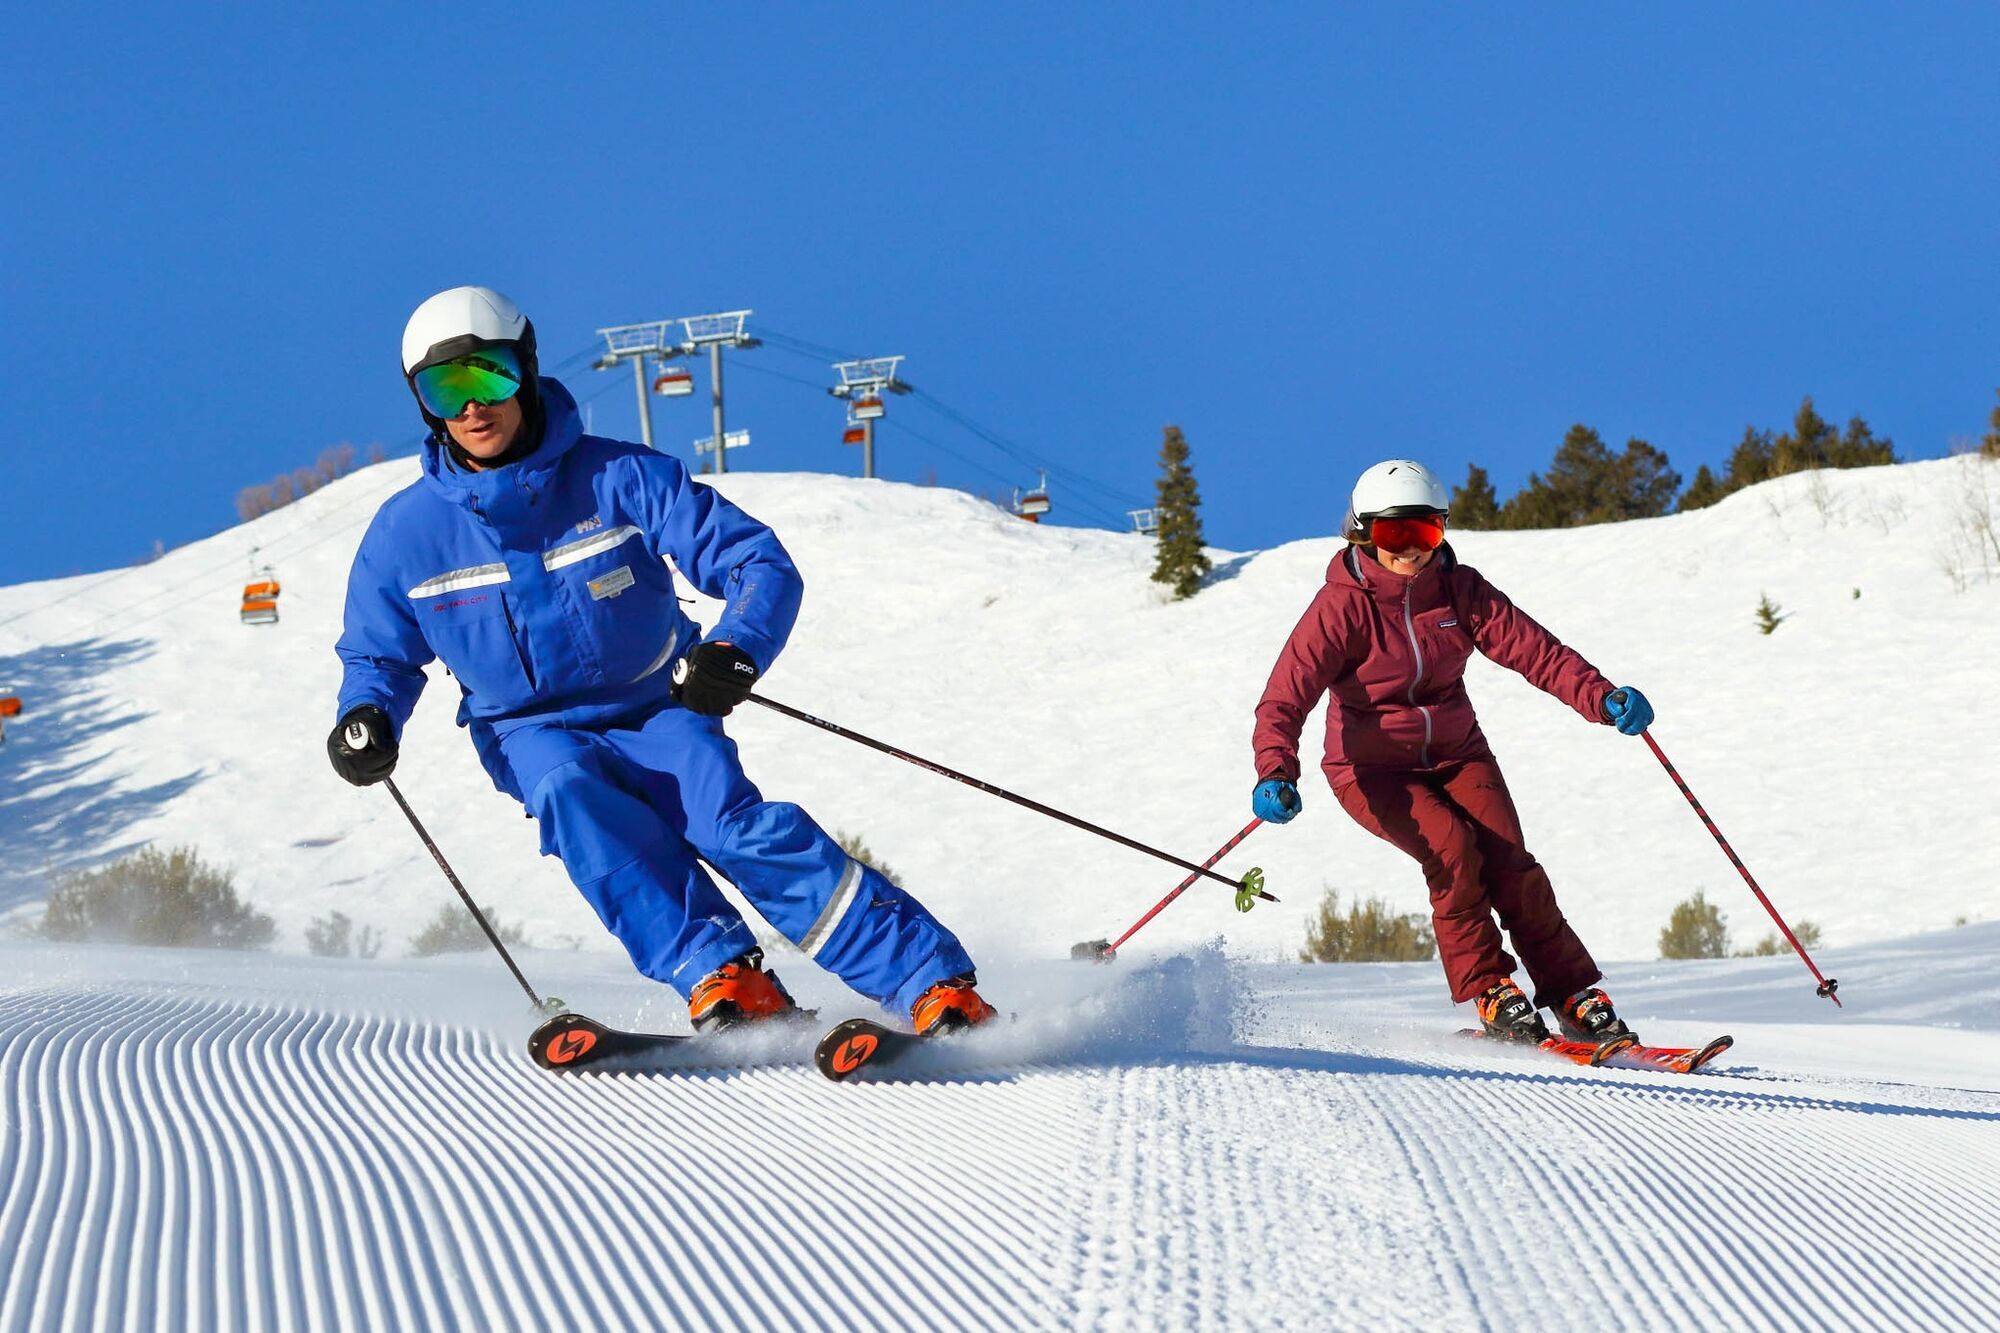 Over 7,300 acres of terrain: the most picturesque ski resort in the United States